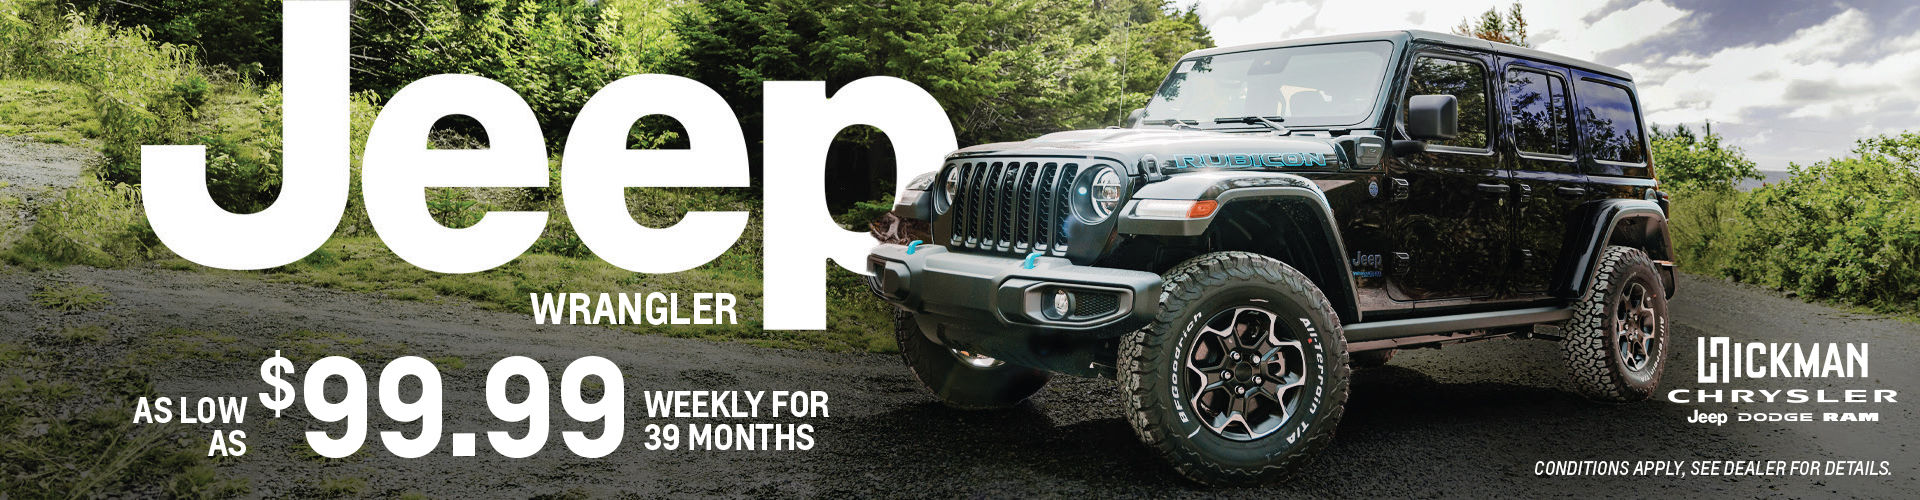 Jeep Wrangler $99 Weekly Lease